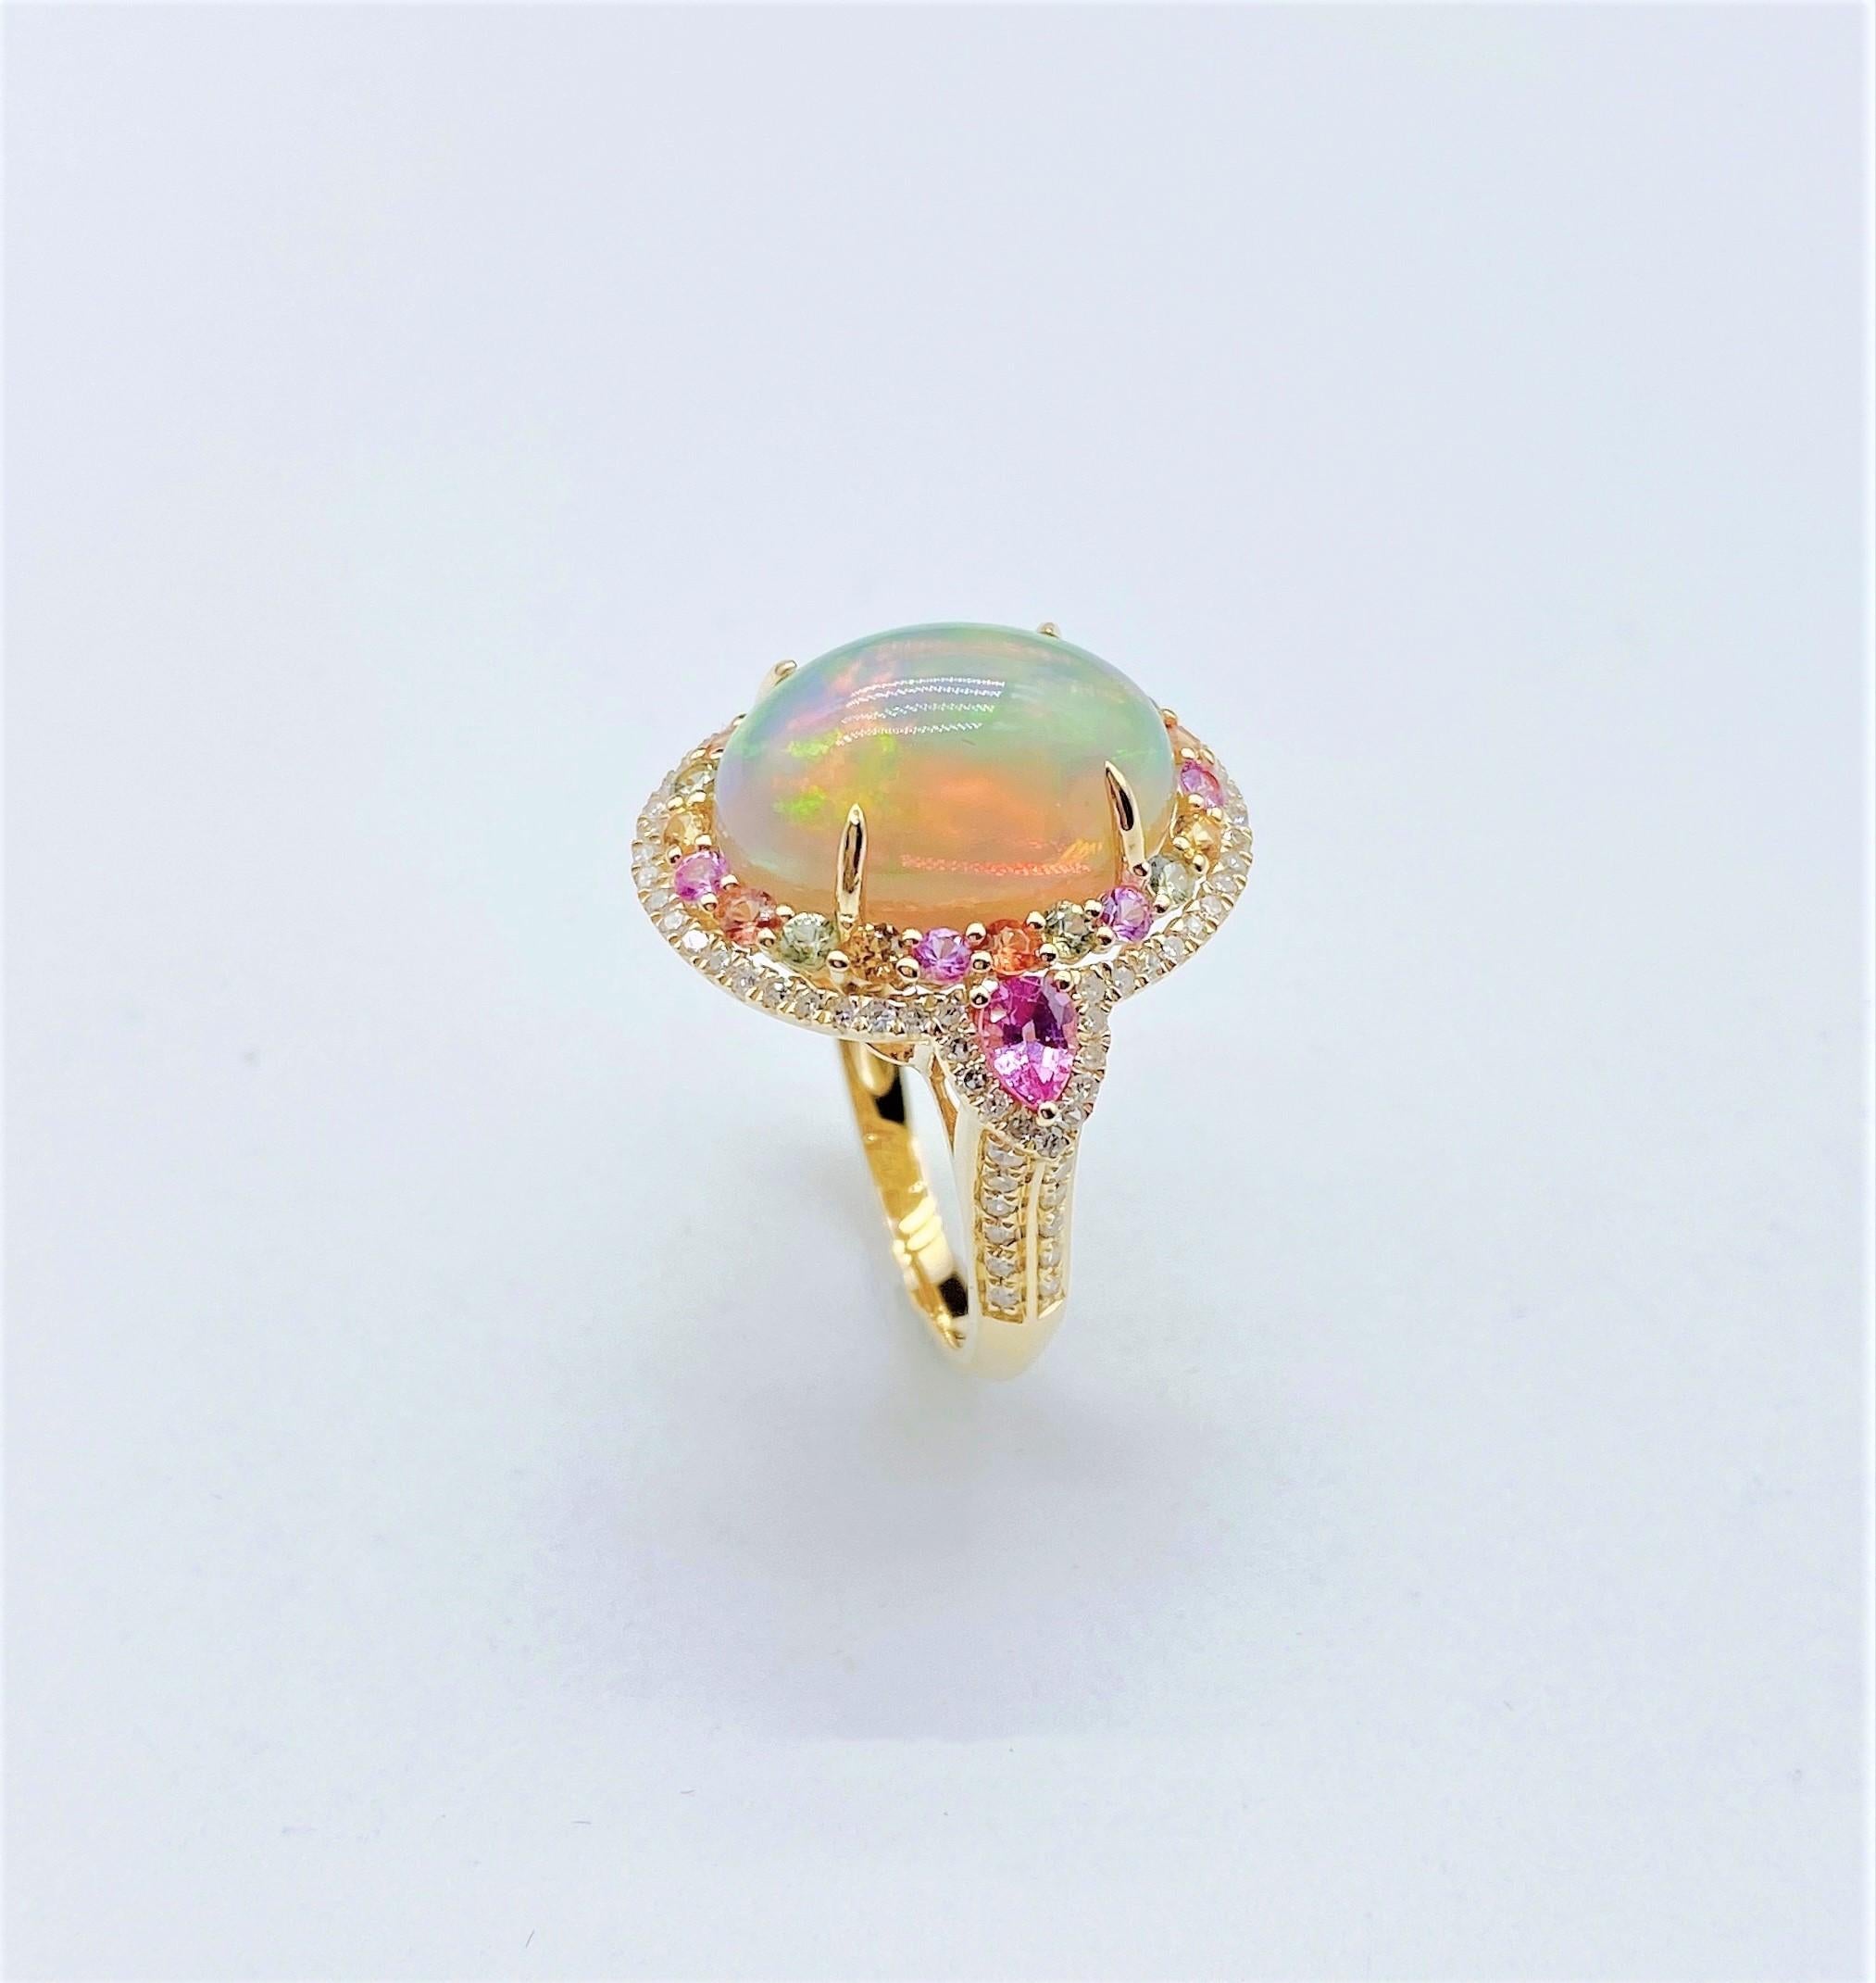 The Following Item we are offering is a Rare Important Radiant 18KT Gold Large Fancy Fiery White Opal Diamond Pink Sapphire Ring. Ring is comprised of A LARGE Gorgeous Fancy Fiery White Rainbow Opal surrounded by a Beautiful Halo of Fancy Rainbow